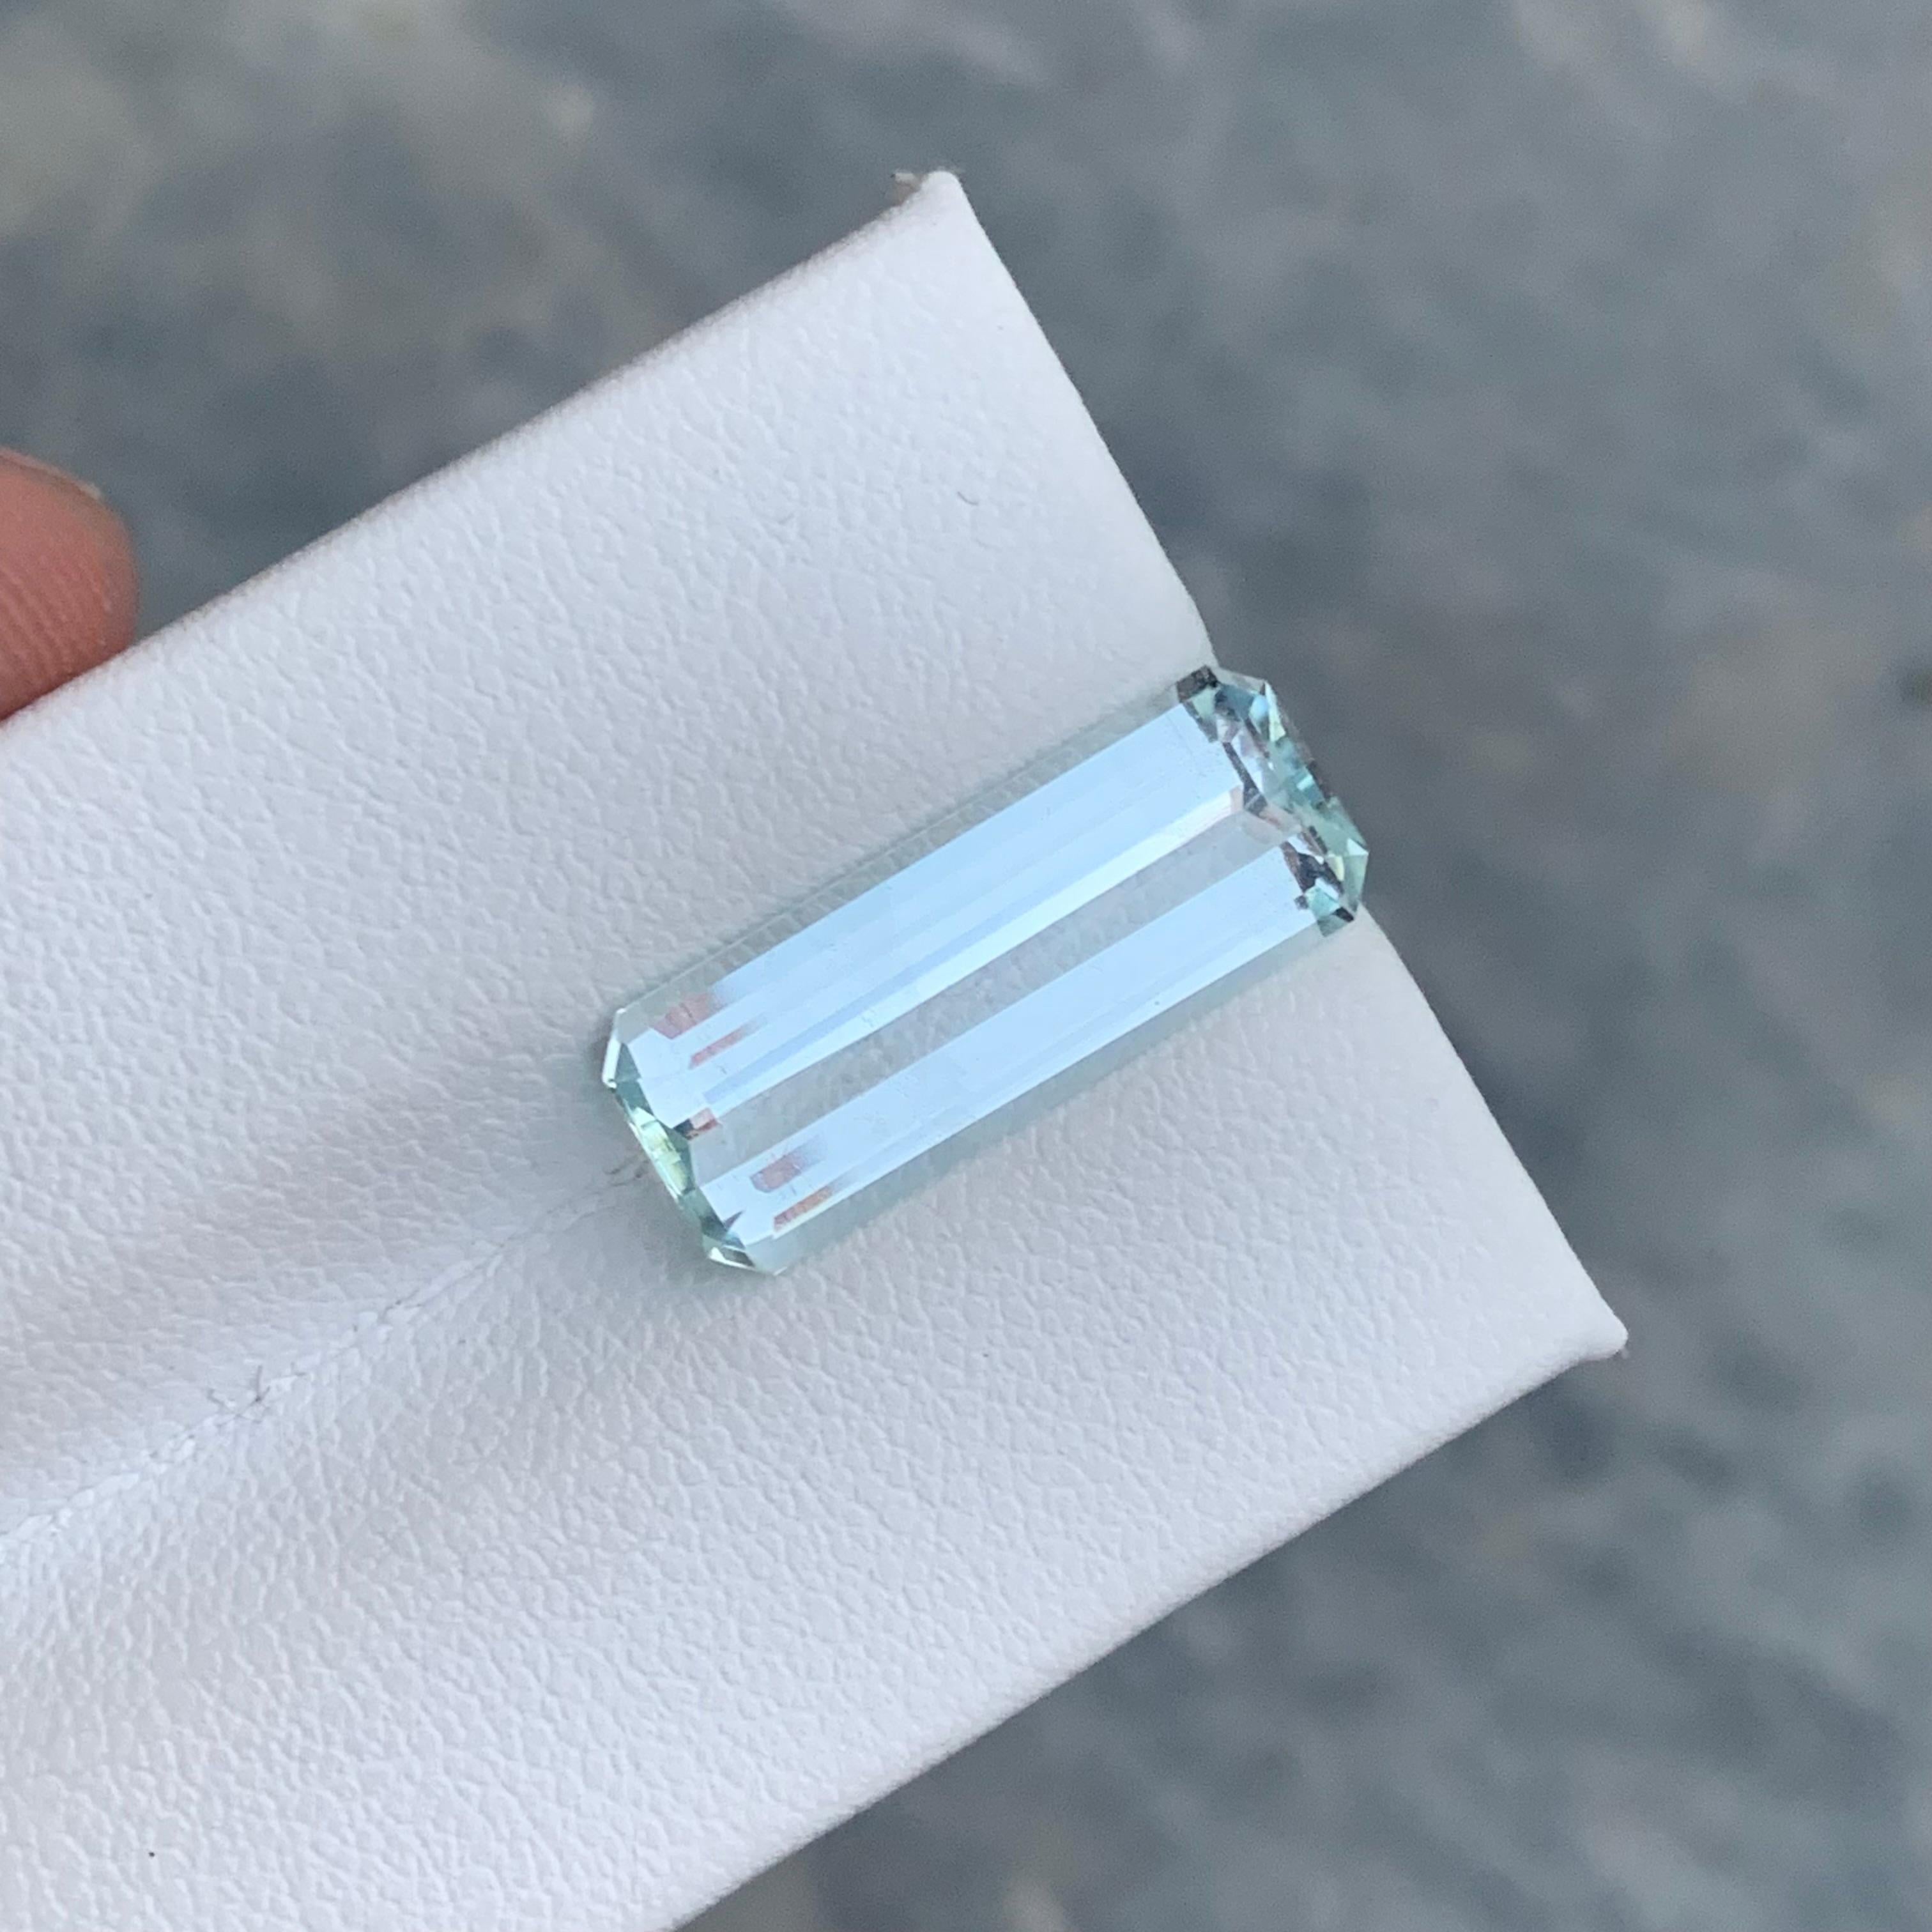 Gemstone Type : Aquamarine
Weight : 5.45 Carats
Dimensions : 19.3x7.4x4.9 Mm
Clarity : Eye Clean
Origin : Pakistan
Shape: Shield
Color: Light White Blue 
Certificate: On Demand
Birthstone Month: March
It has a shielding effect on your energy field